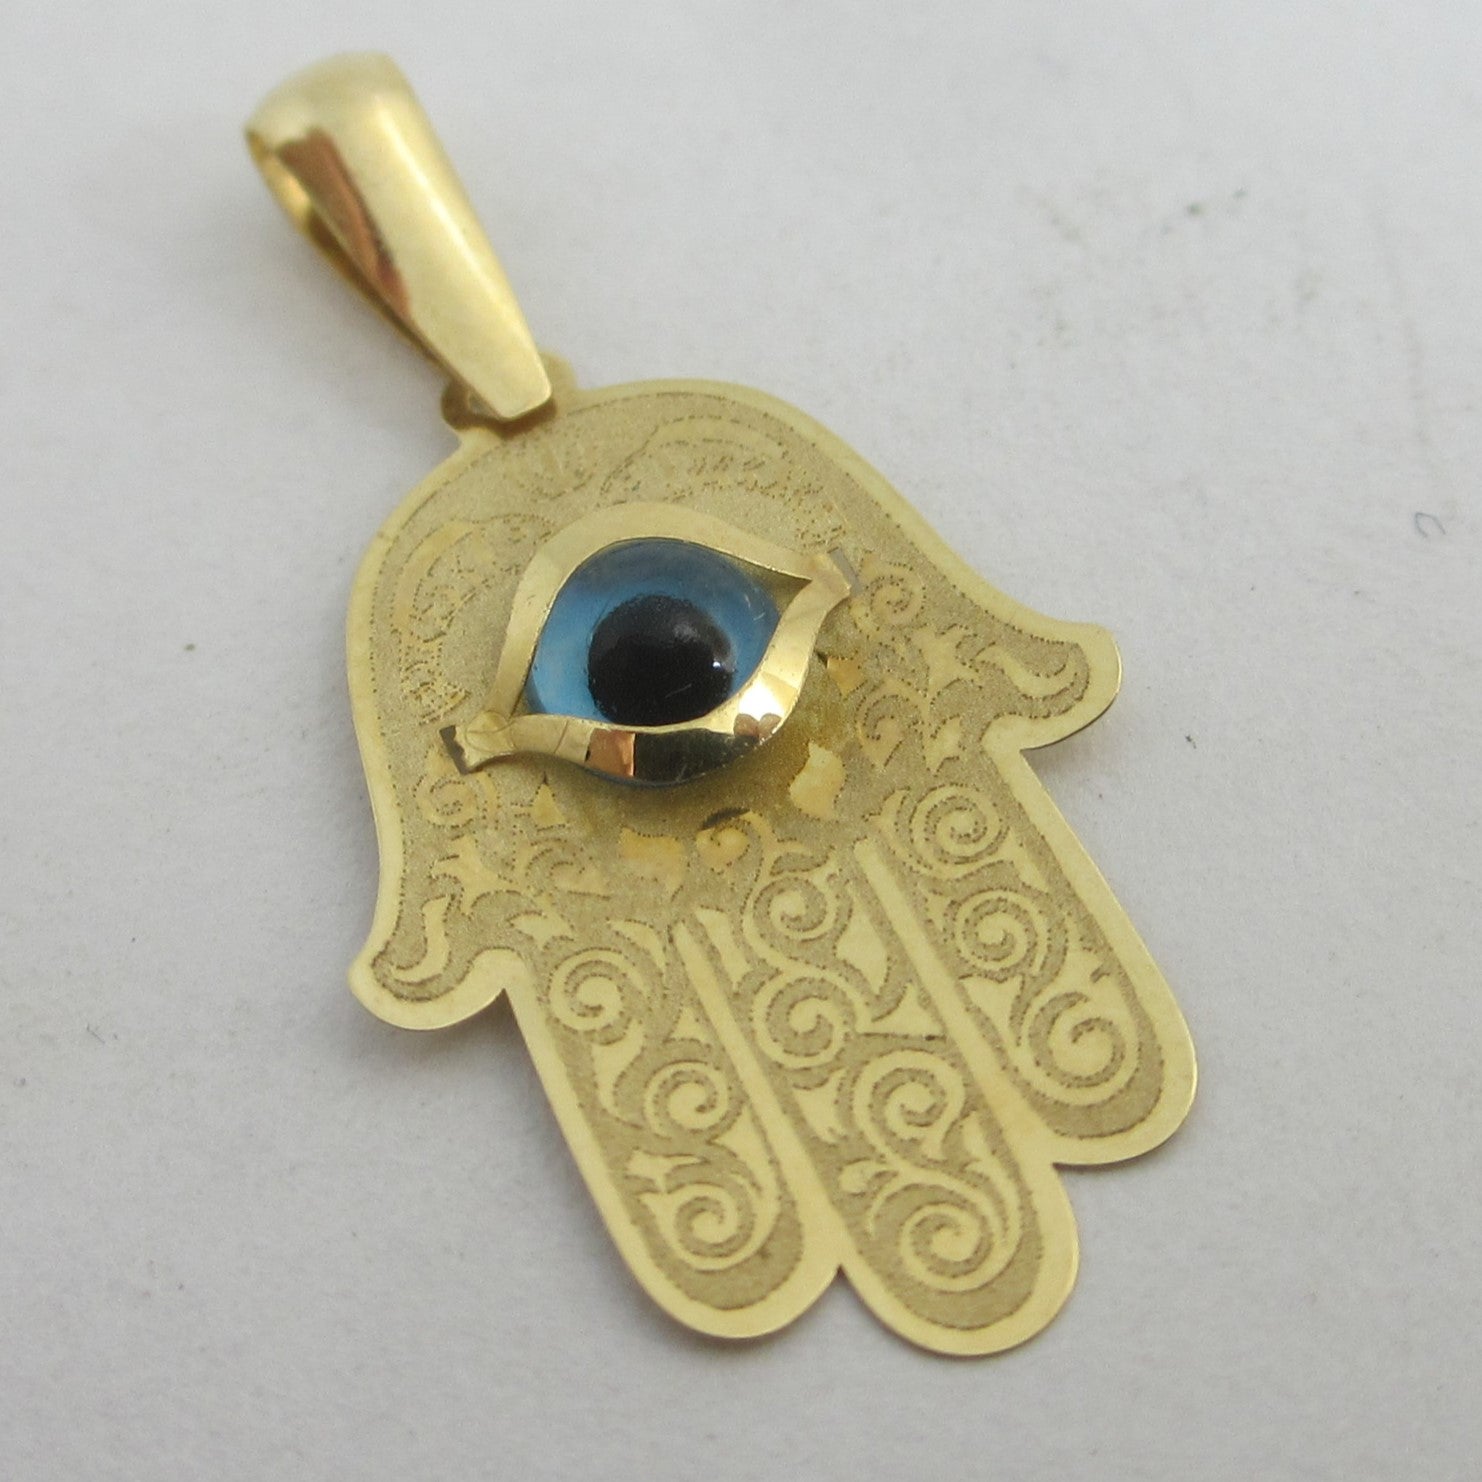 All Seeing Eye in Hand of Fatima 18k Gold Charm Pendant Vintage c1980